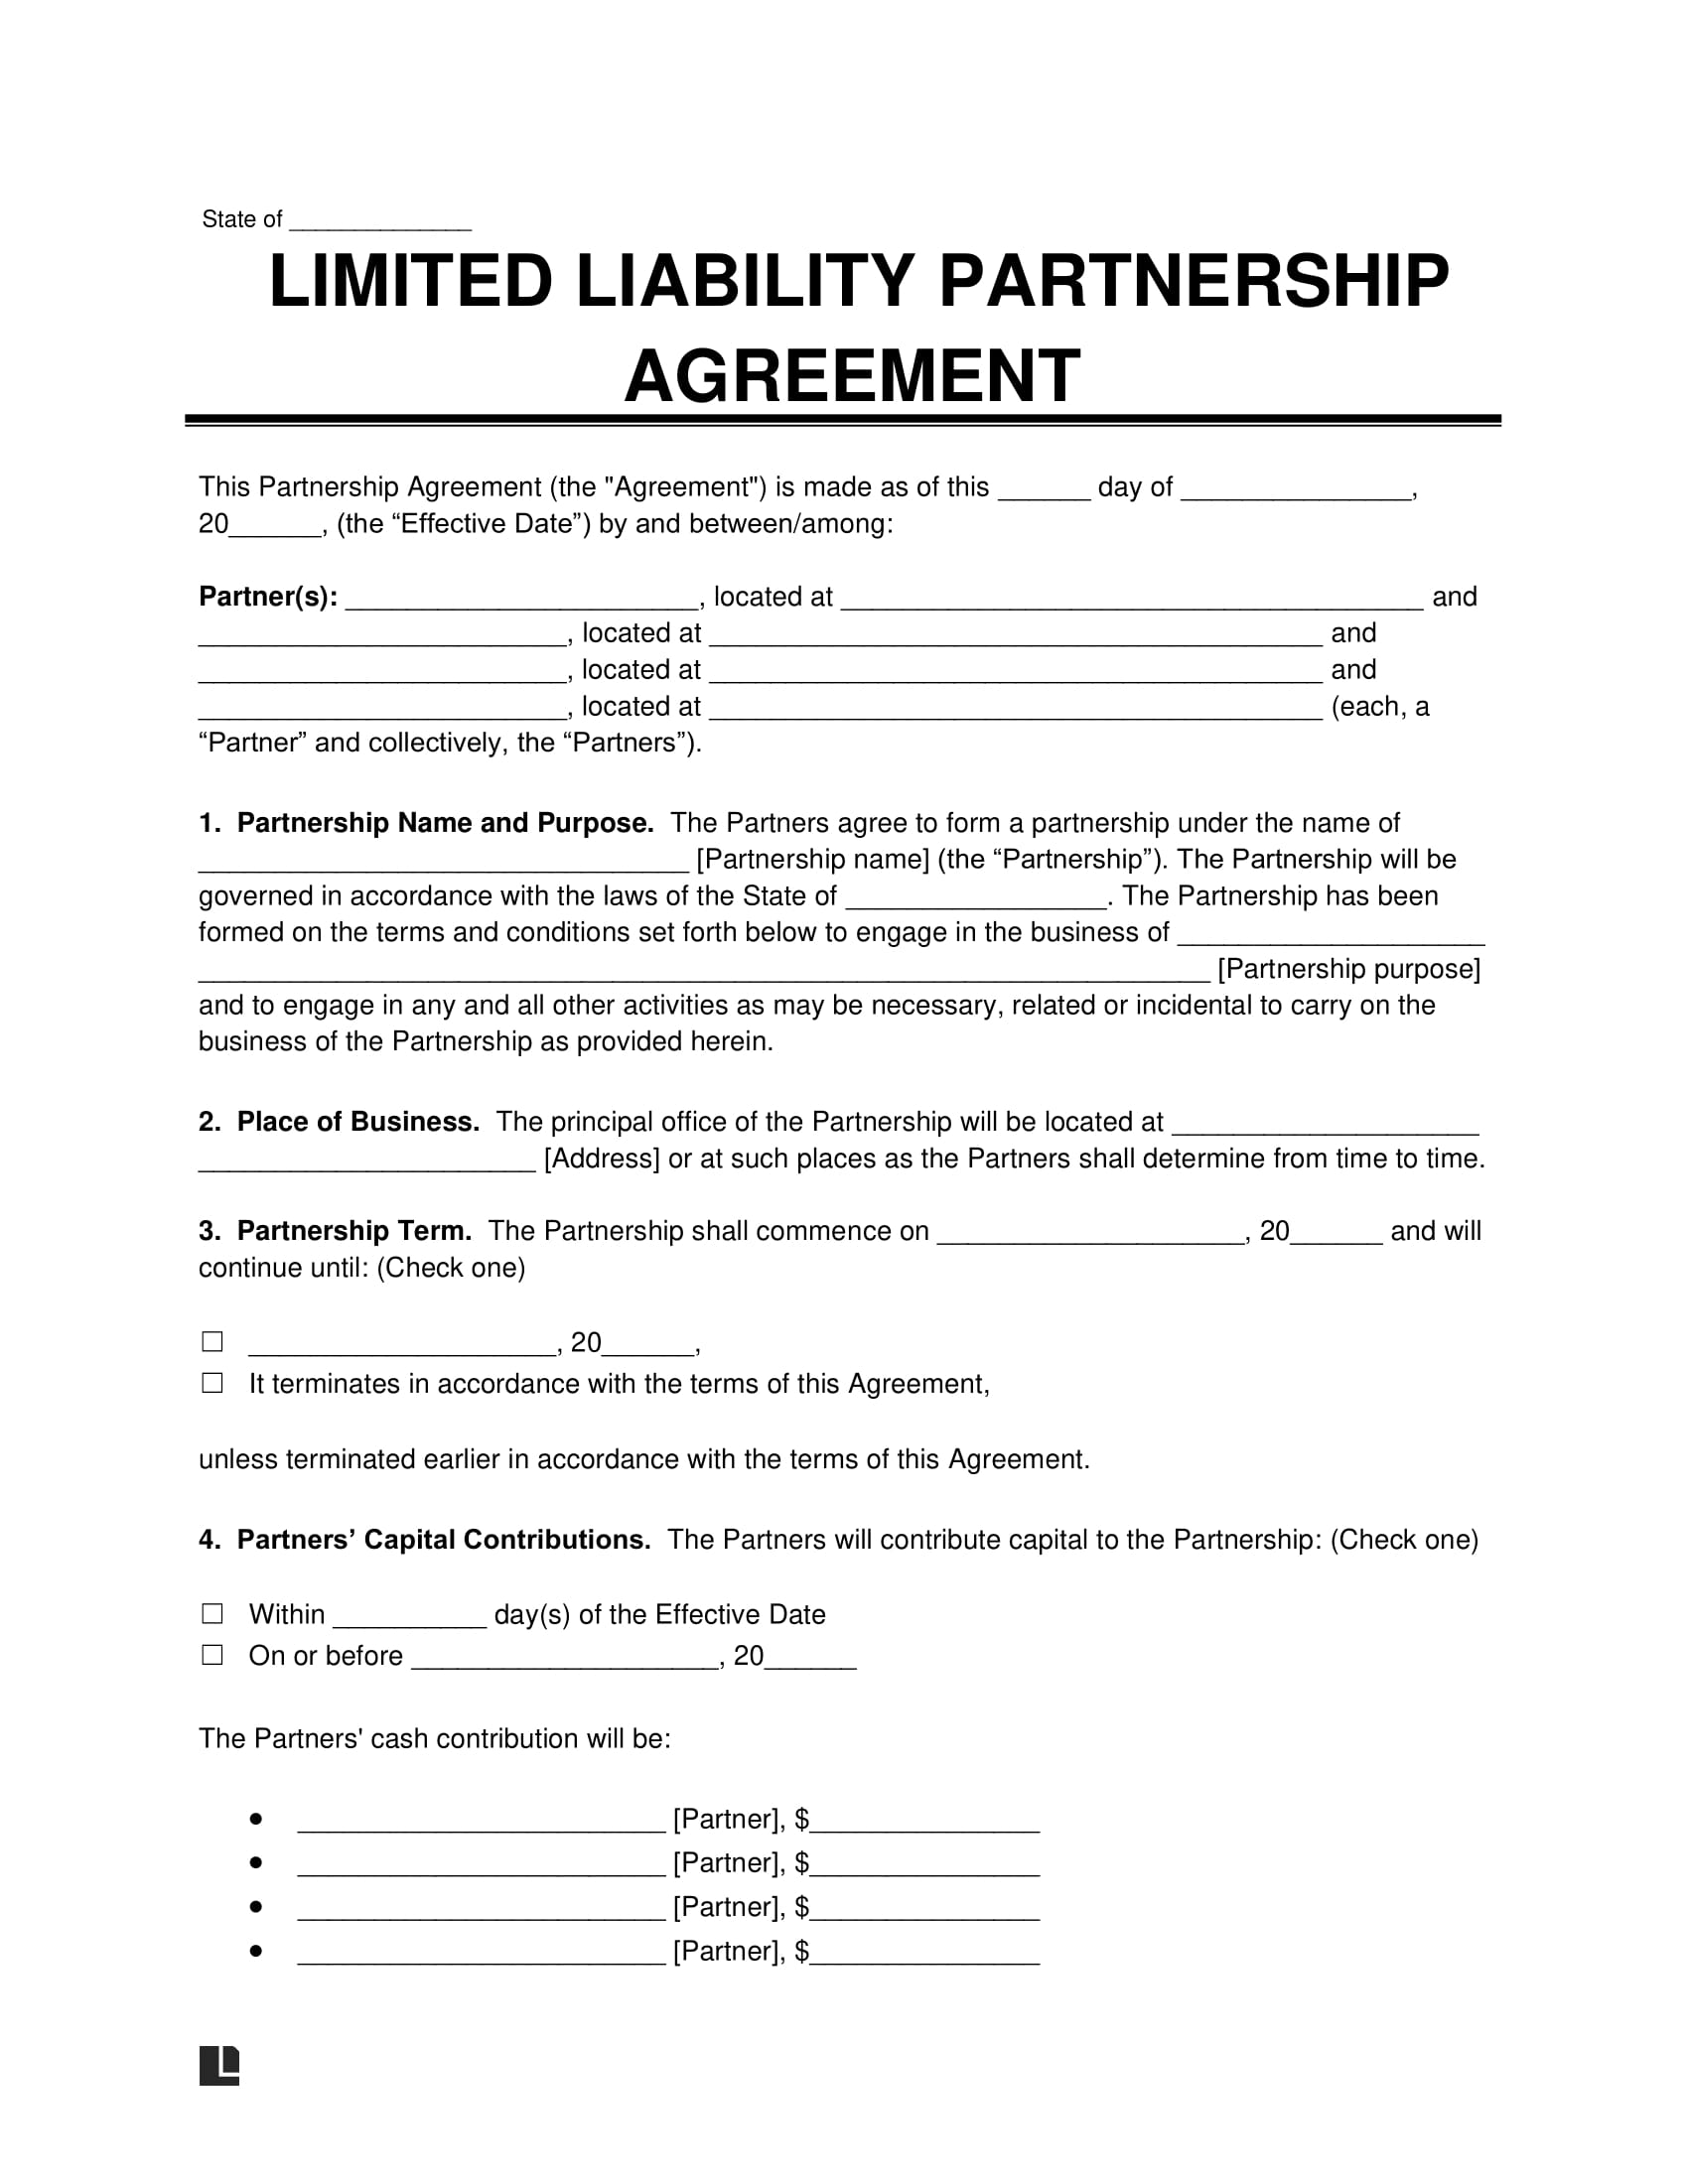 Free Limited Liability Partnership (LLP) Agreement Template